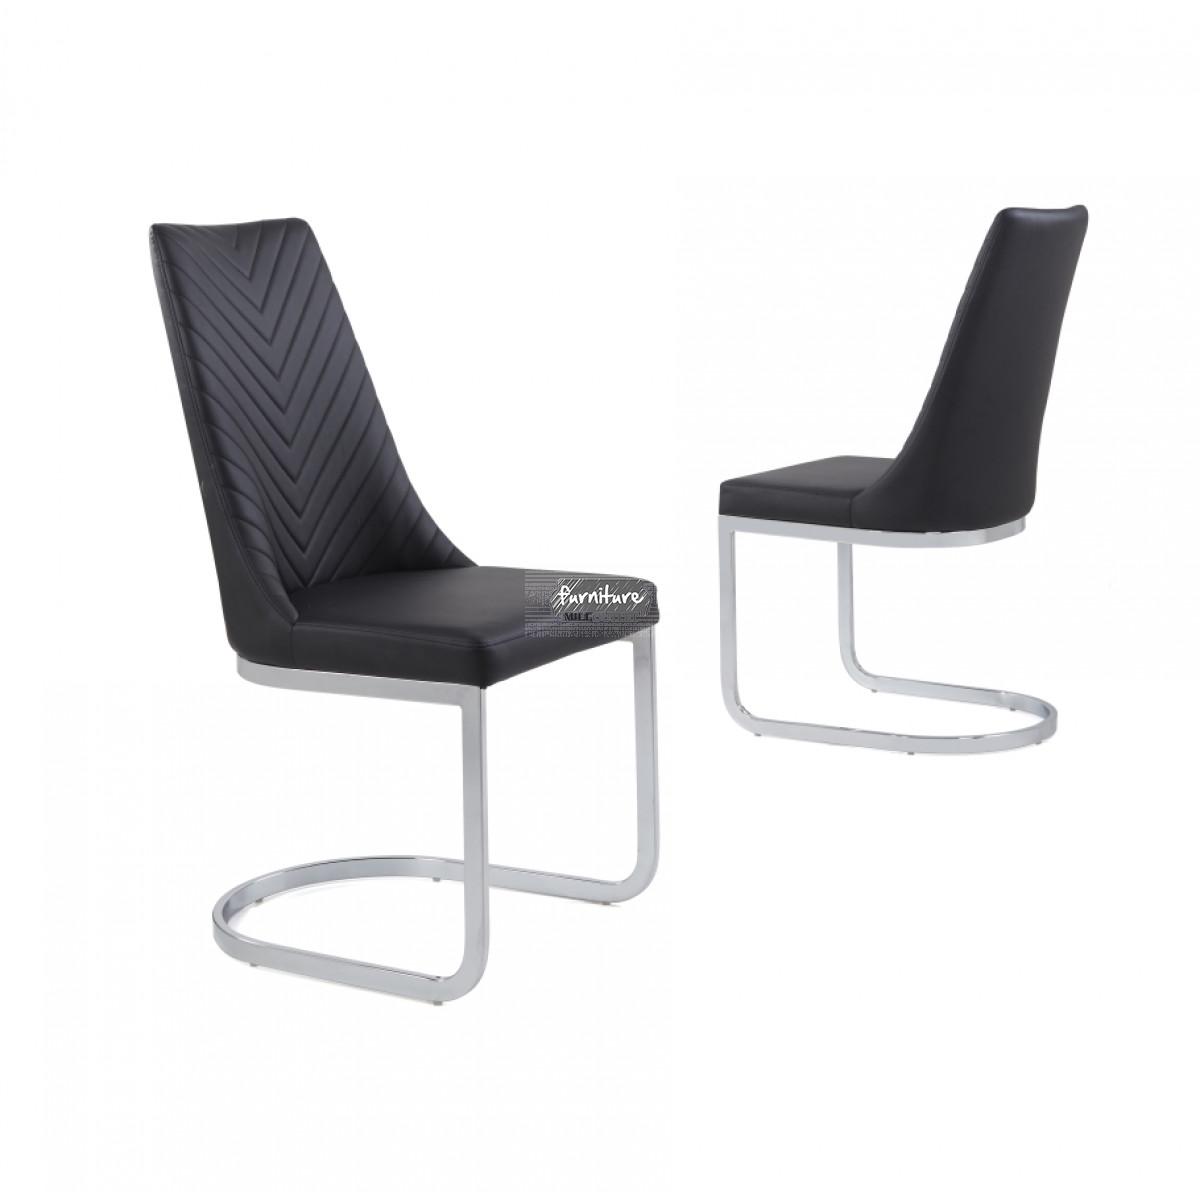 Buy Curva Black Faux Leather Dining Chair | Modern Dining Room Chair